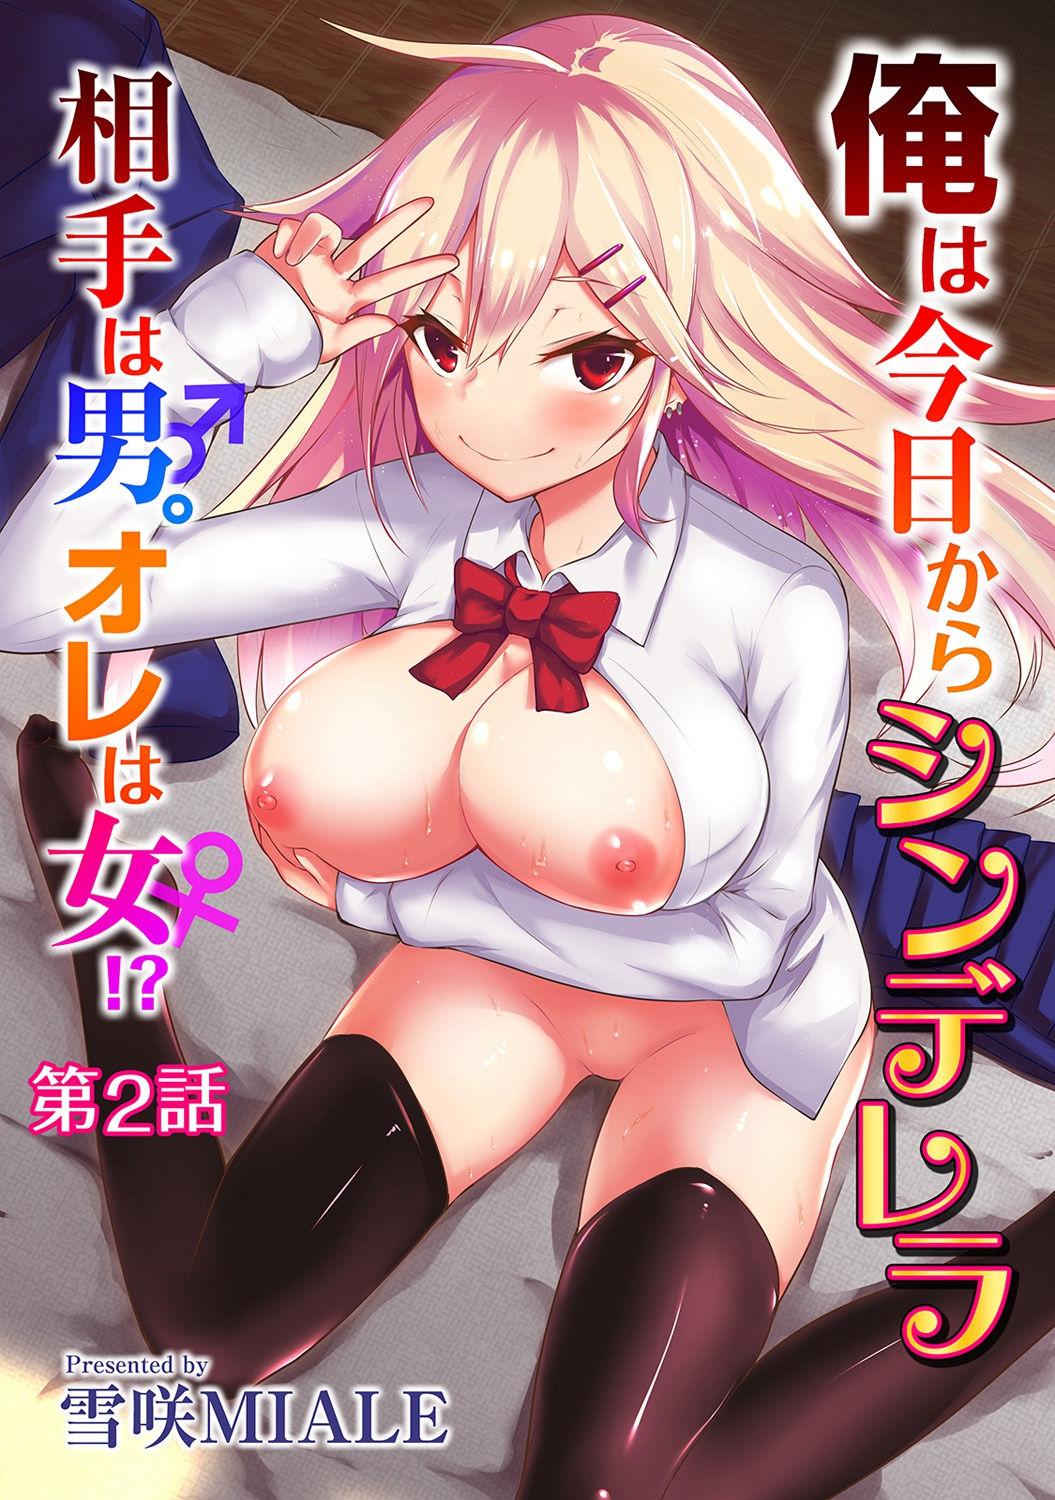 Chubby Ore wa Kyou kara Cinderella Aite wa Otoko. Ore wa Onna!? | From now on, I’m Cinderella. My Partner is a Man and I’m a Woman!? Ch. 2 Gay Theresome - Picture 1